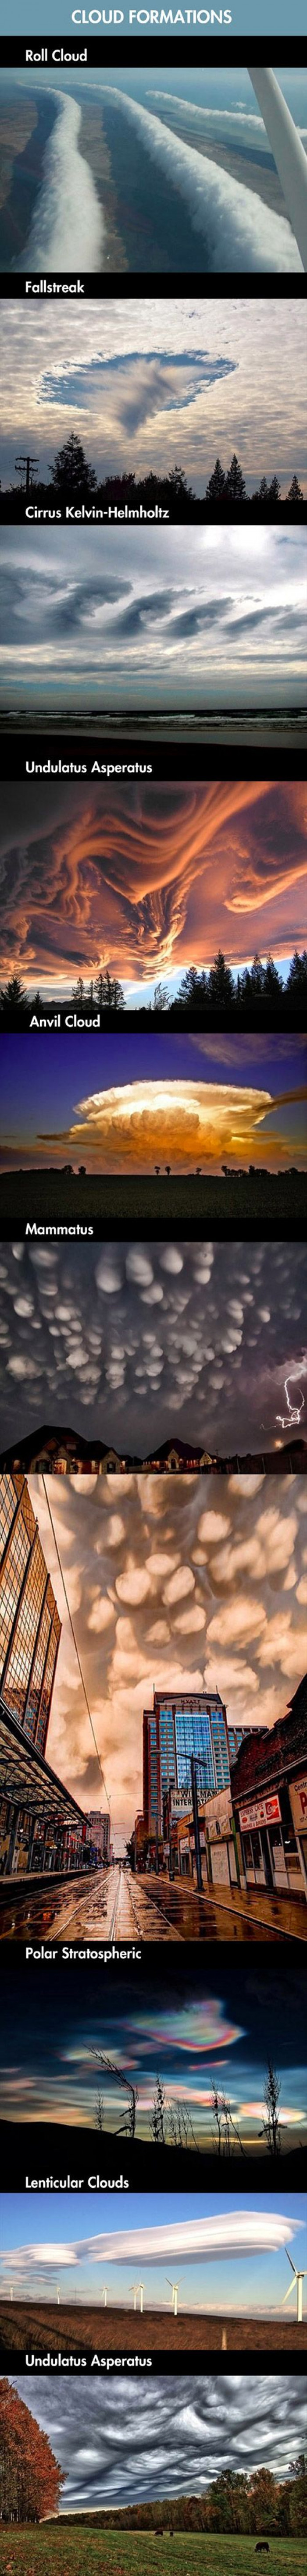 Incredible Cloud Formations You Have To See